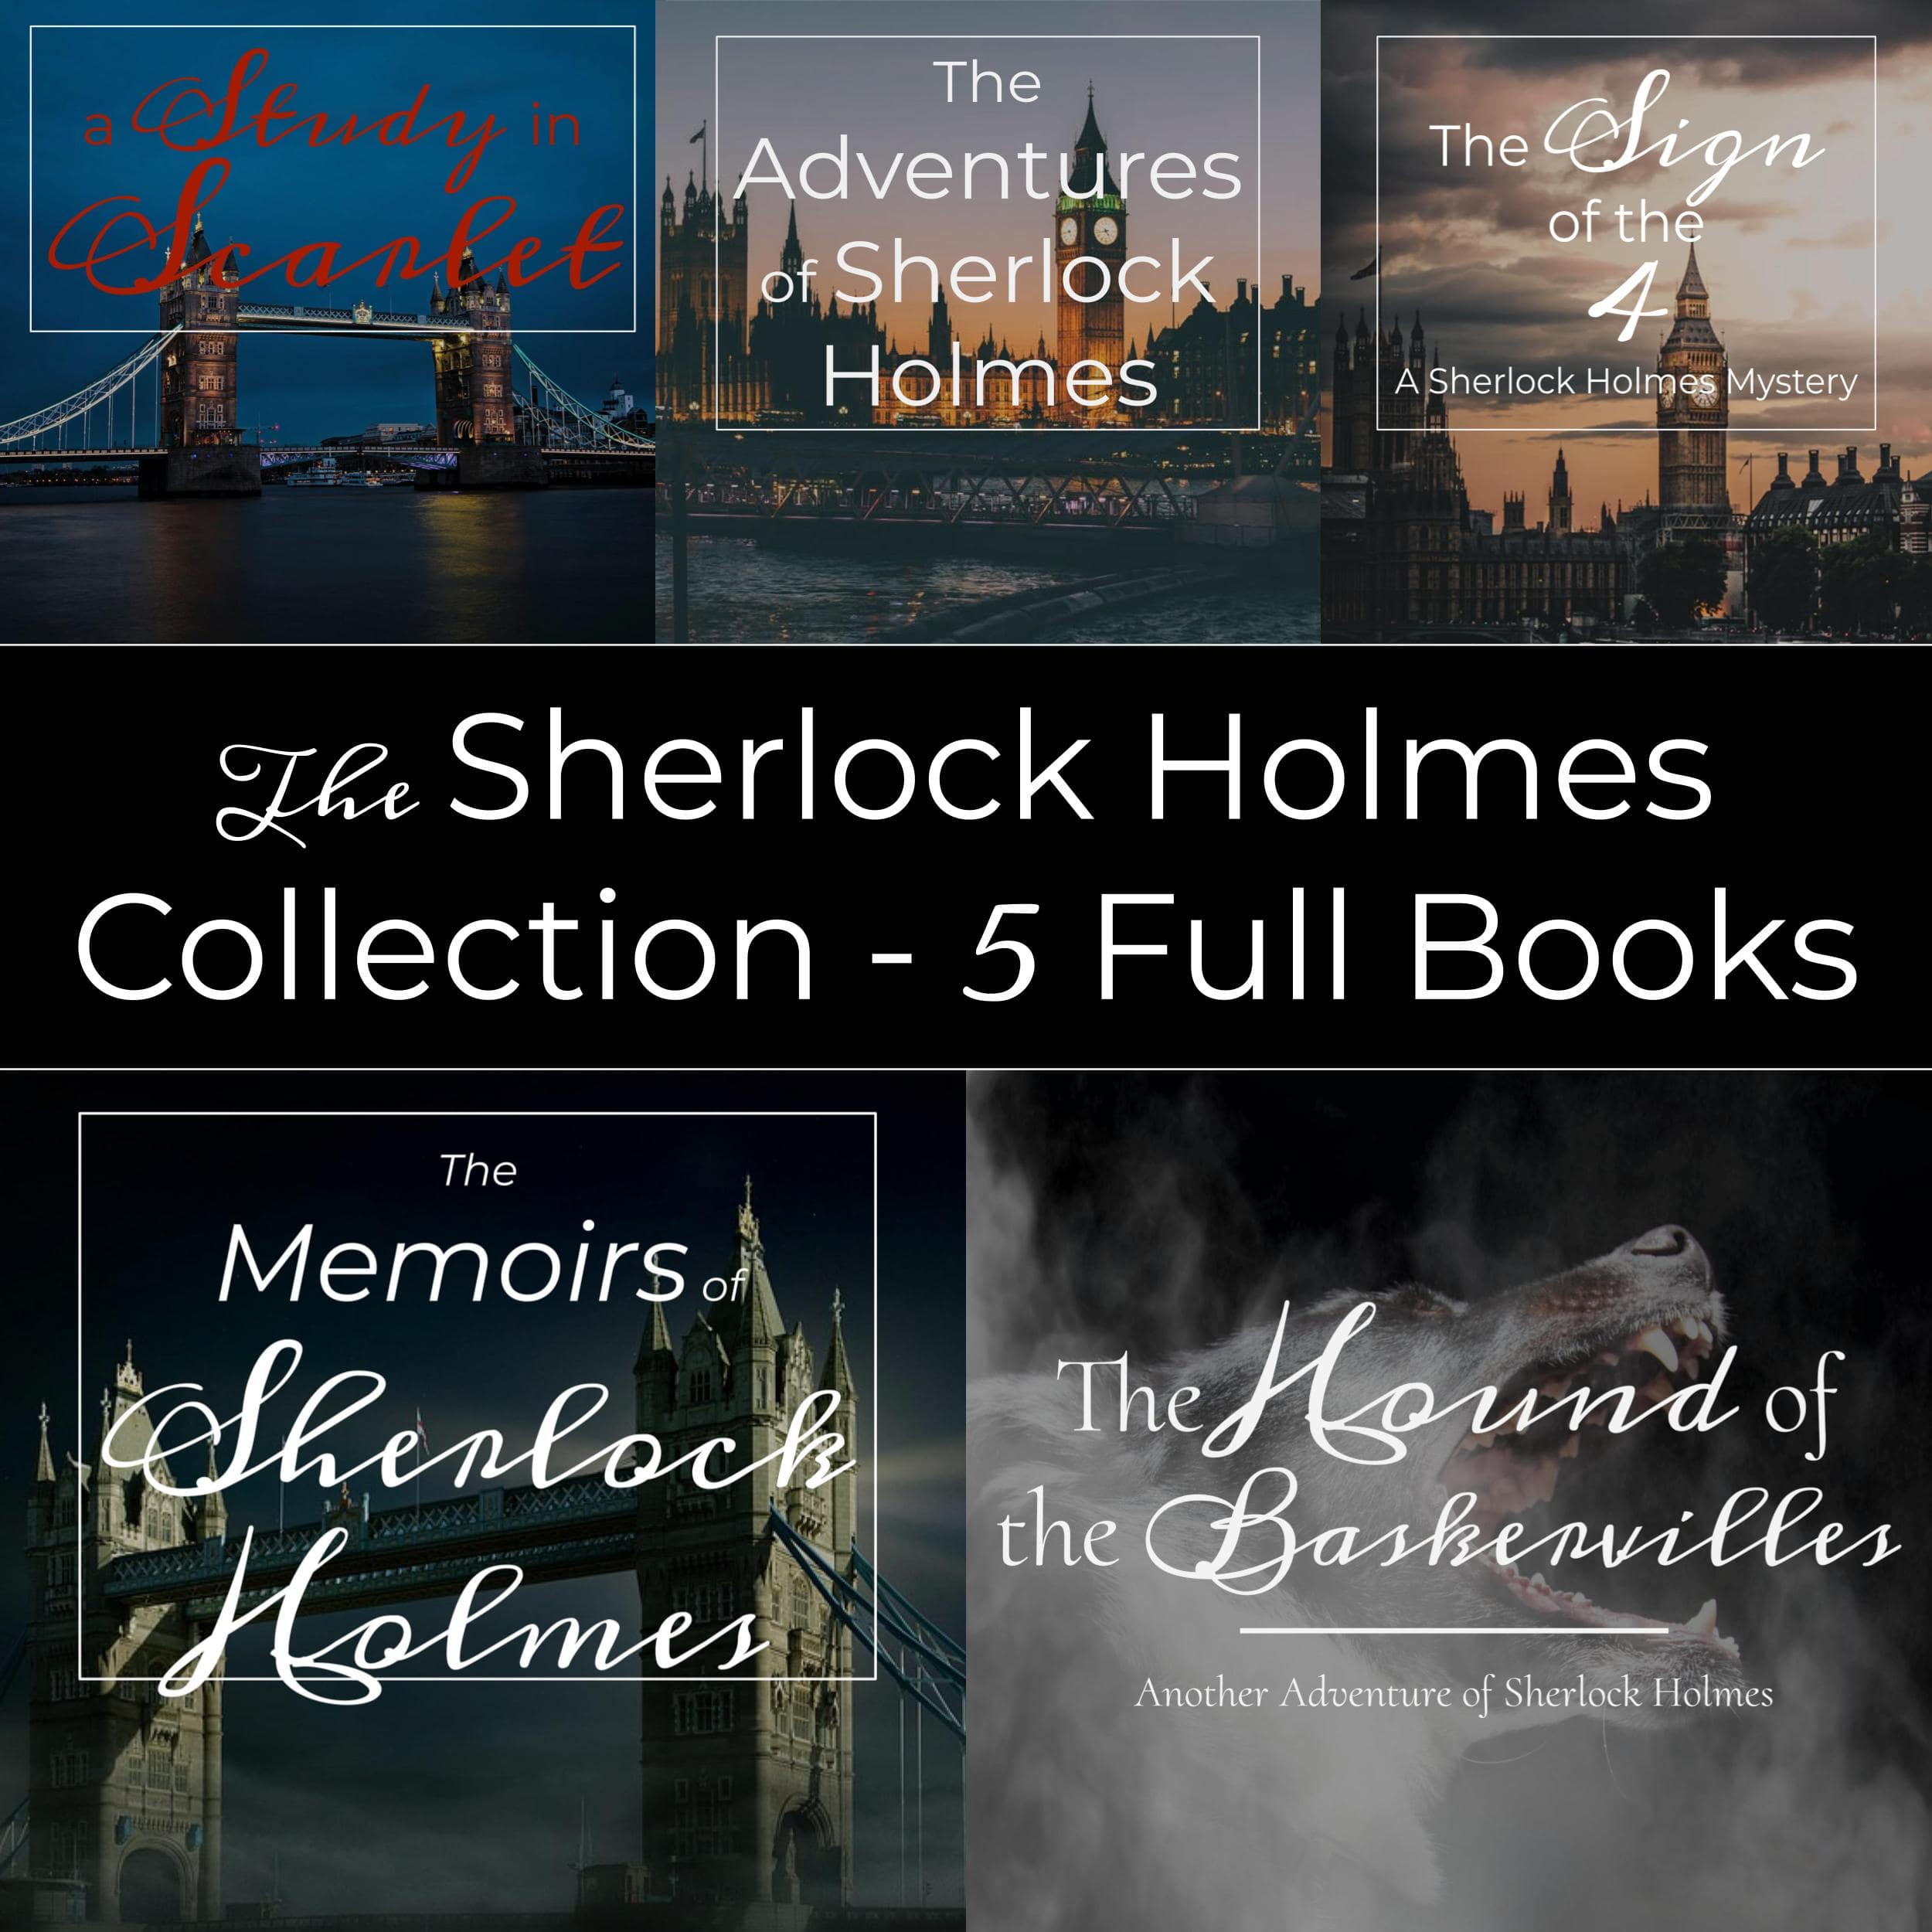 Sherlock Holmes Collection – 5 Full Audiobooks: Unabridged Audiobooks of A Study in Scarlet, The Adventures of Sherlock Holmes, The Sign of the Four, The Memoirs of Sherlock Holmes, and The Hound of the Baskervilles